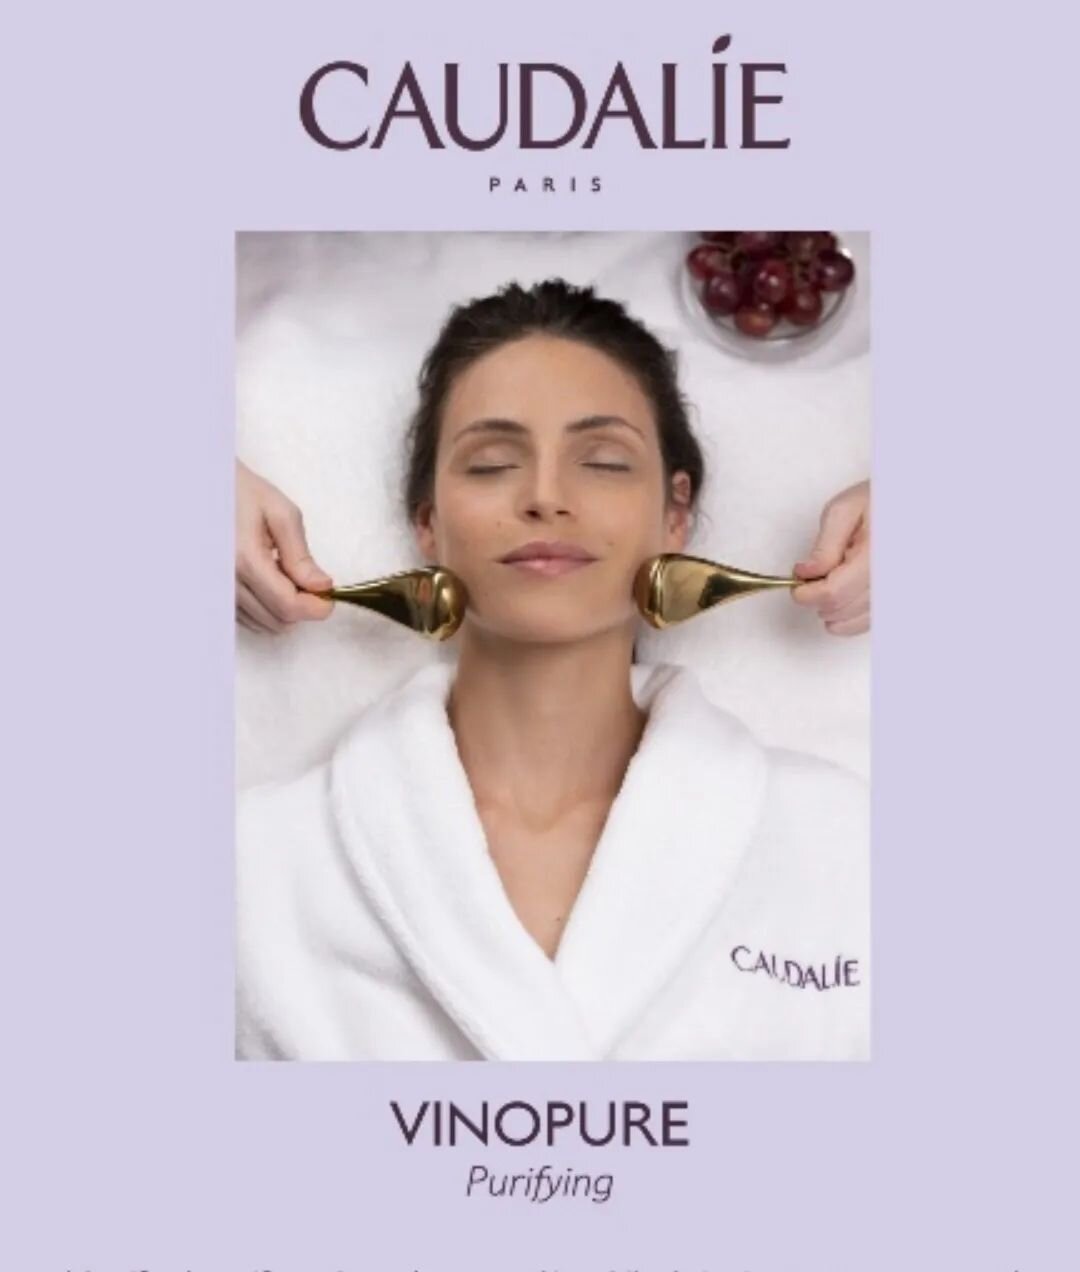 TREATMENT OF THE MONTH!!

@caudalie Vinopure purifying facial &pound;55 (Normally &pound;64) This month only!!

Mattify, detoxify, and soothe your skin while bringing out your natural radiance with our Vinopure facial. The treatment will purify your 